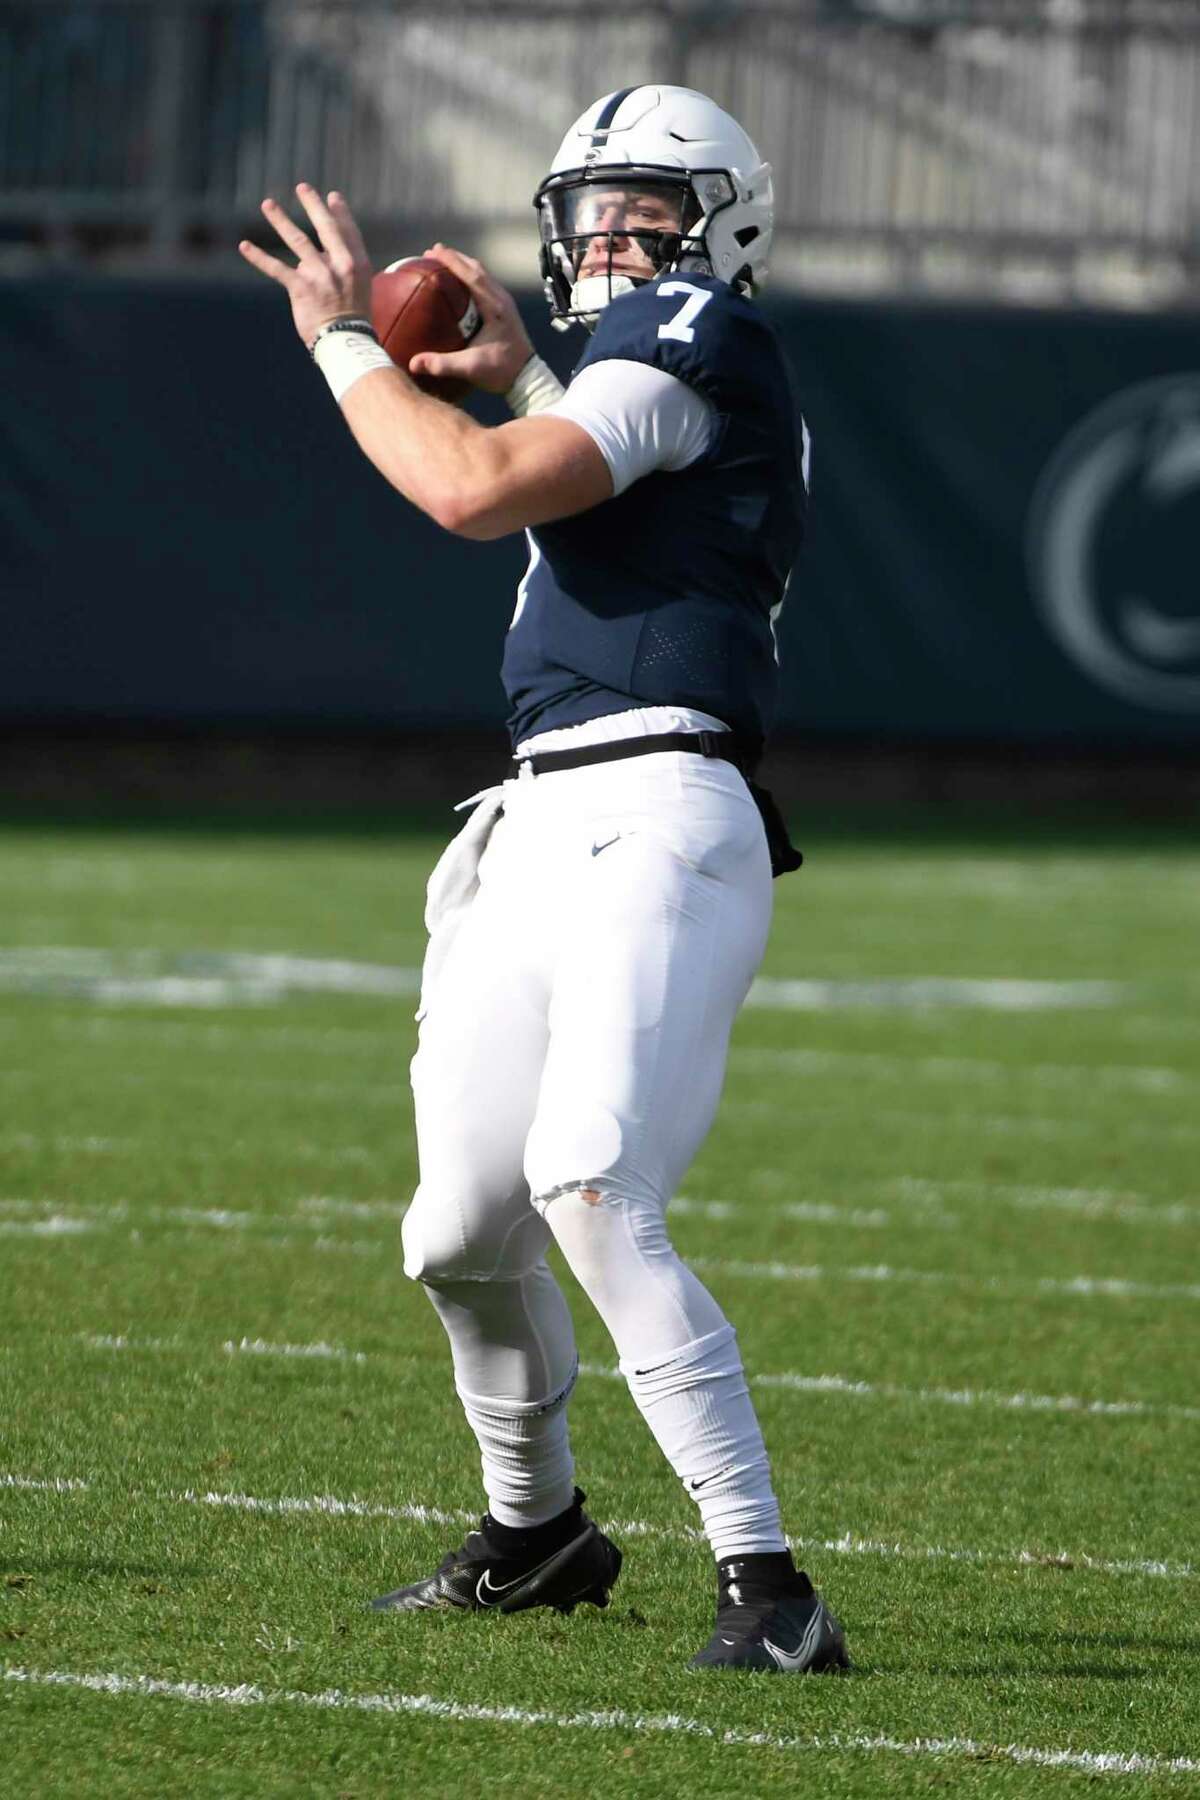 Penn State quarterback Will Levis (7) warms up for an NCAA college football game against Michigan State in State College, Pa., on Saturday, Dec. 12, 2020.